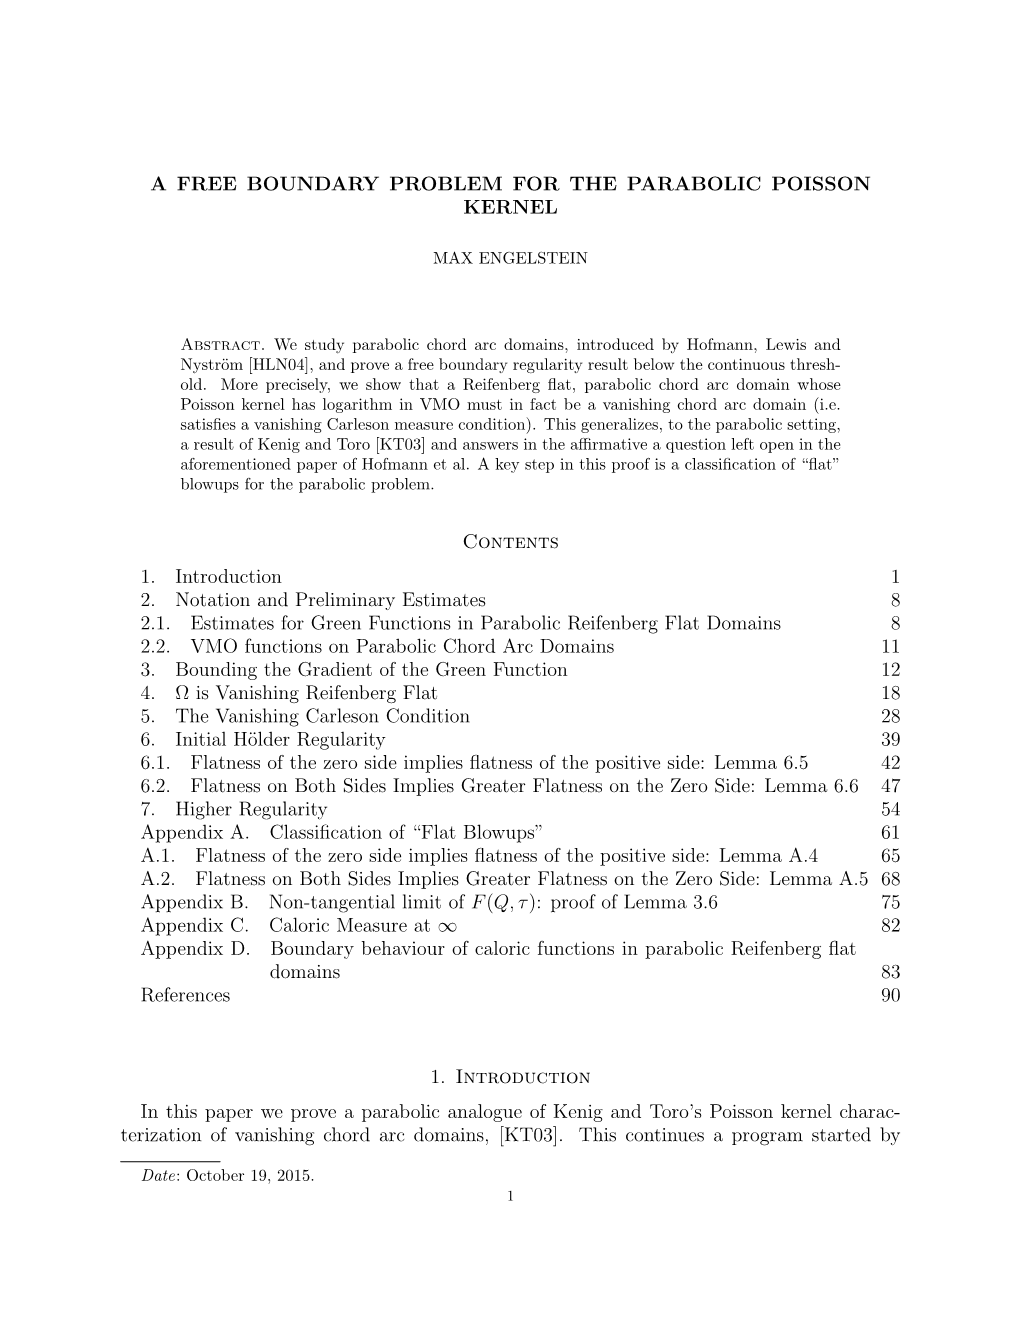 A Free Boundary Problem for the Parabolic Poisson Kernel